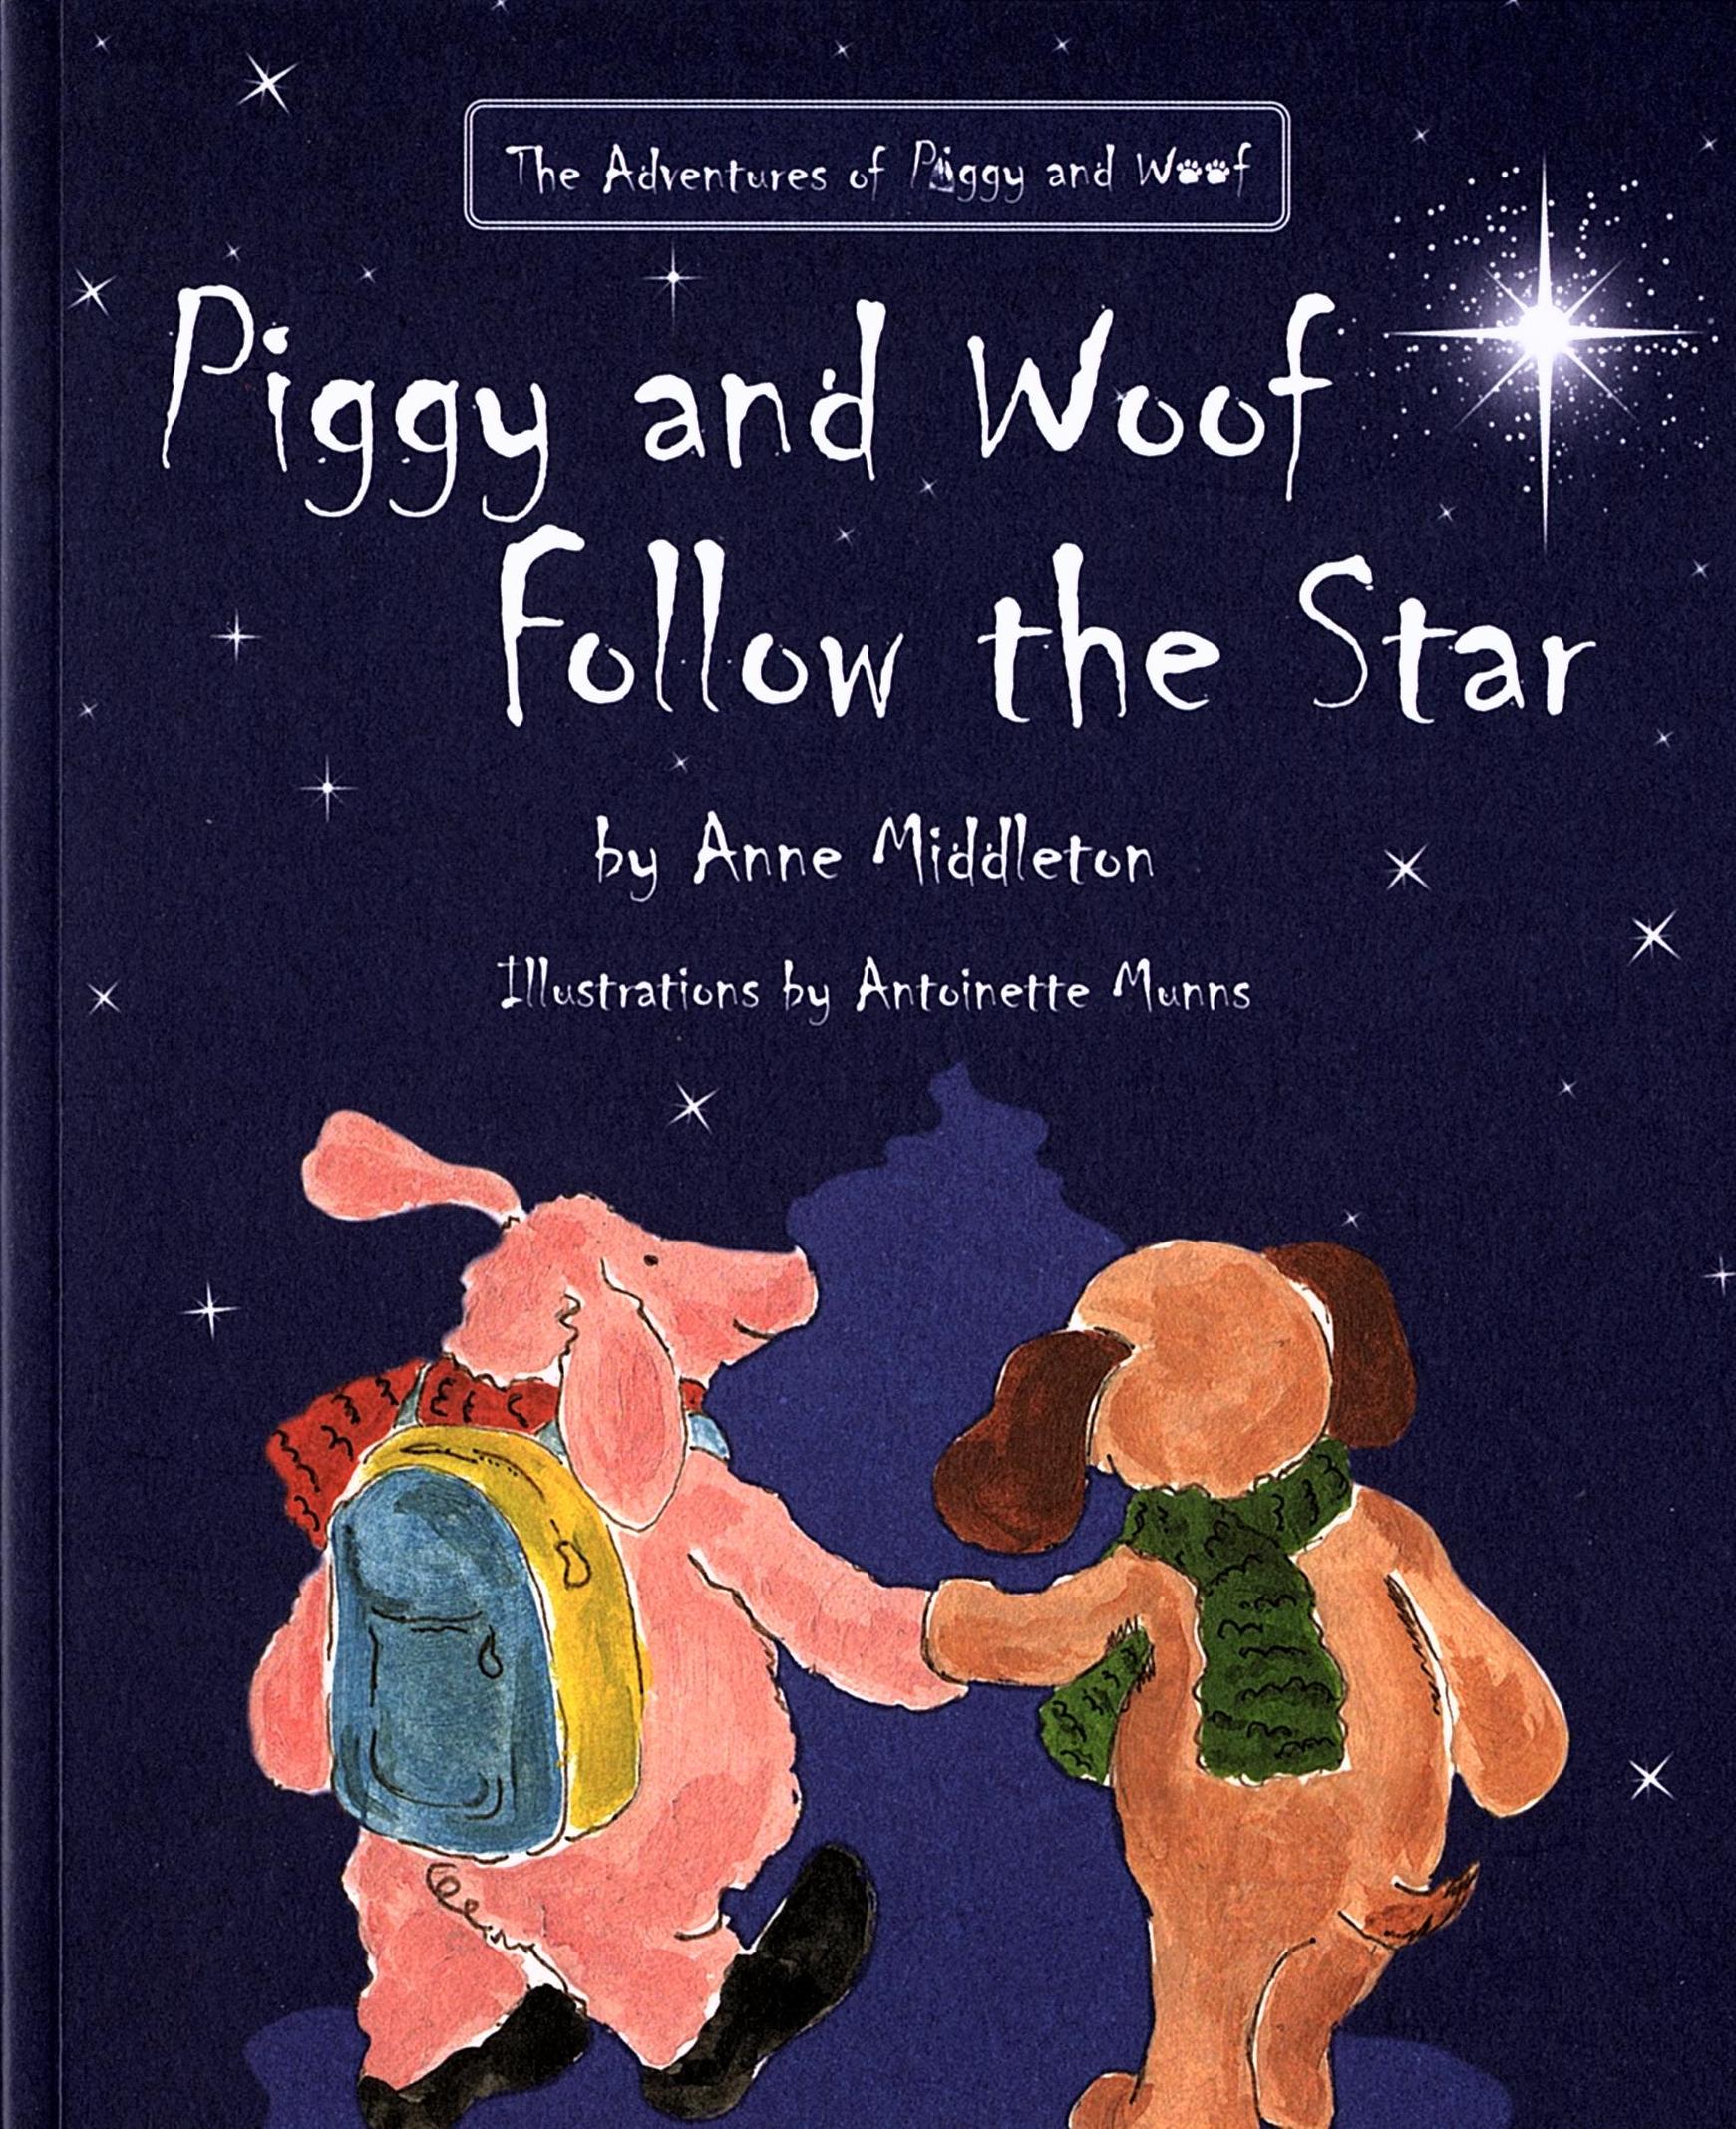 More information on Piggy and the Woof Follow The Star